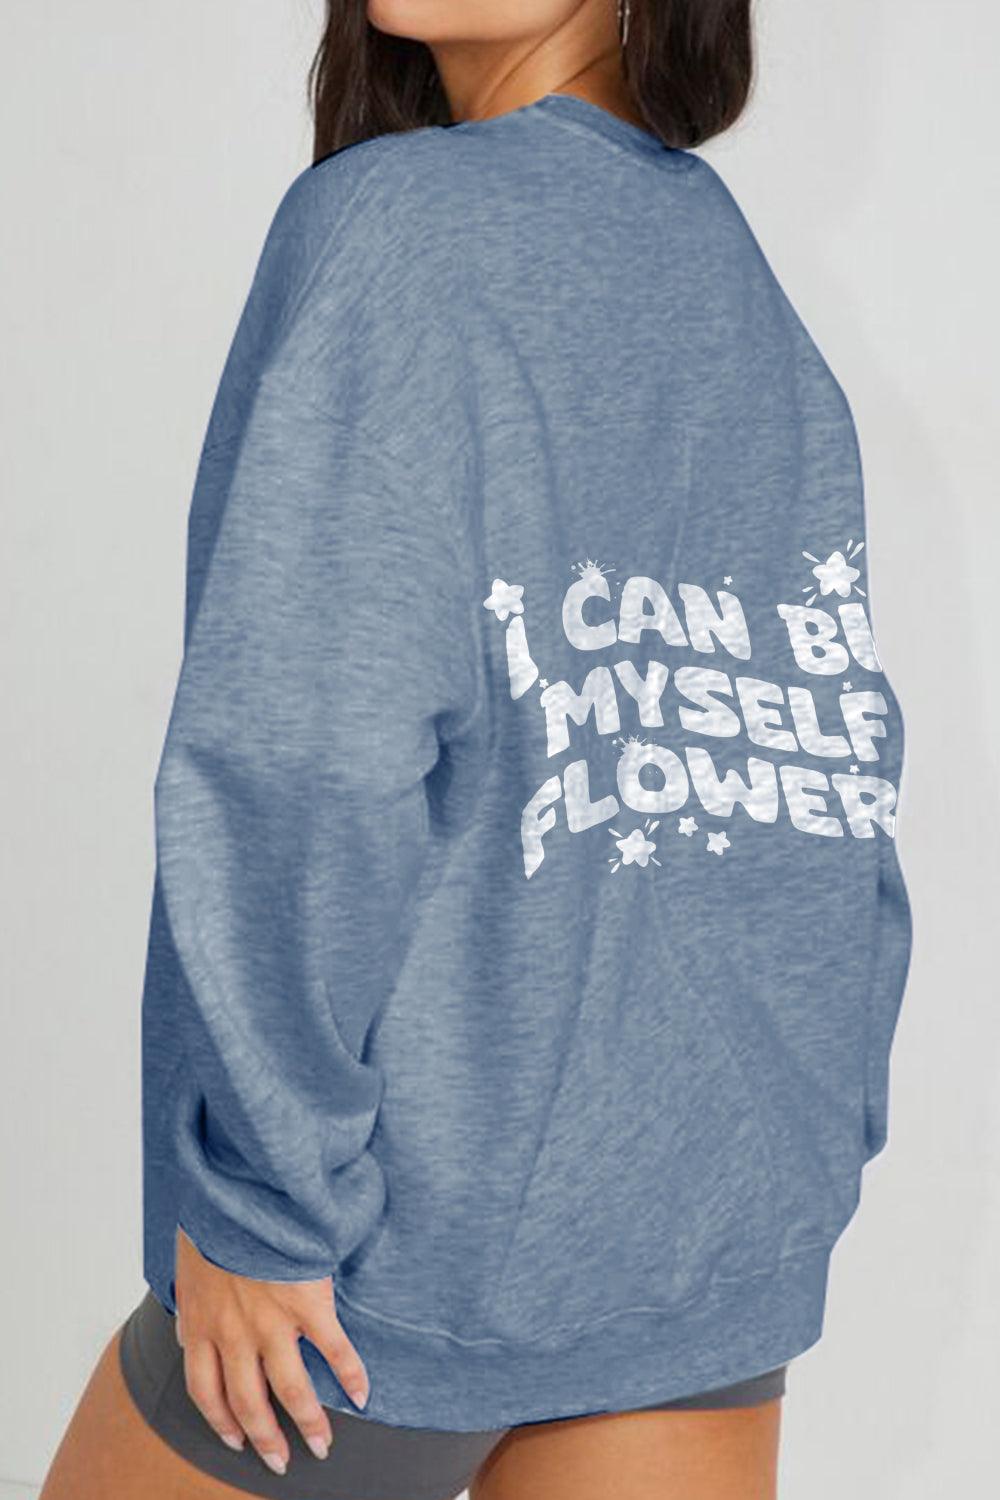 Simply Love Full Size I CAN BUY MYSELF FLOWERS Graphic Sweatshirt - Crazy Like a Daisy Boutique #